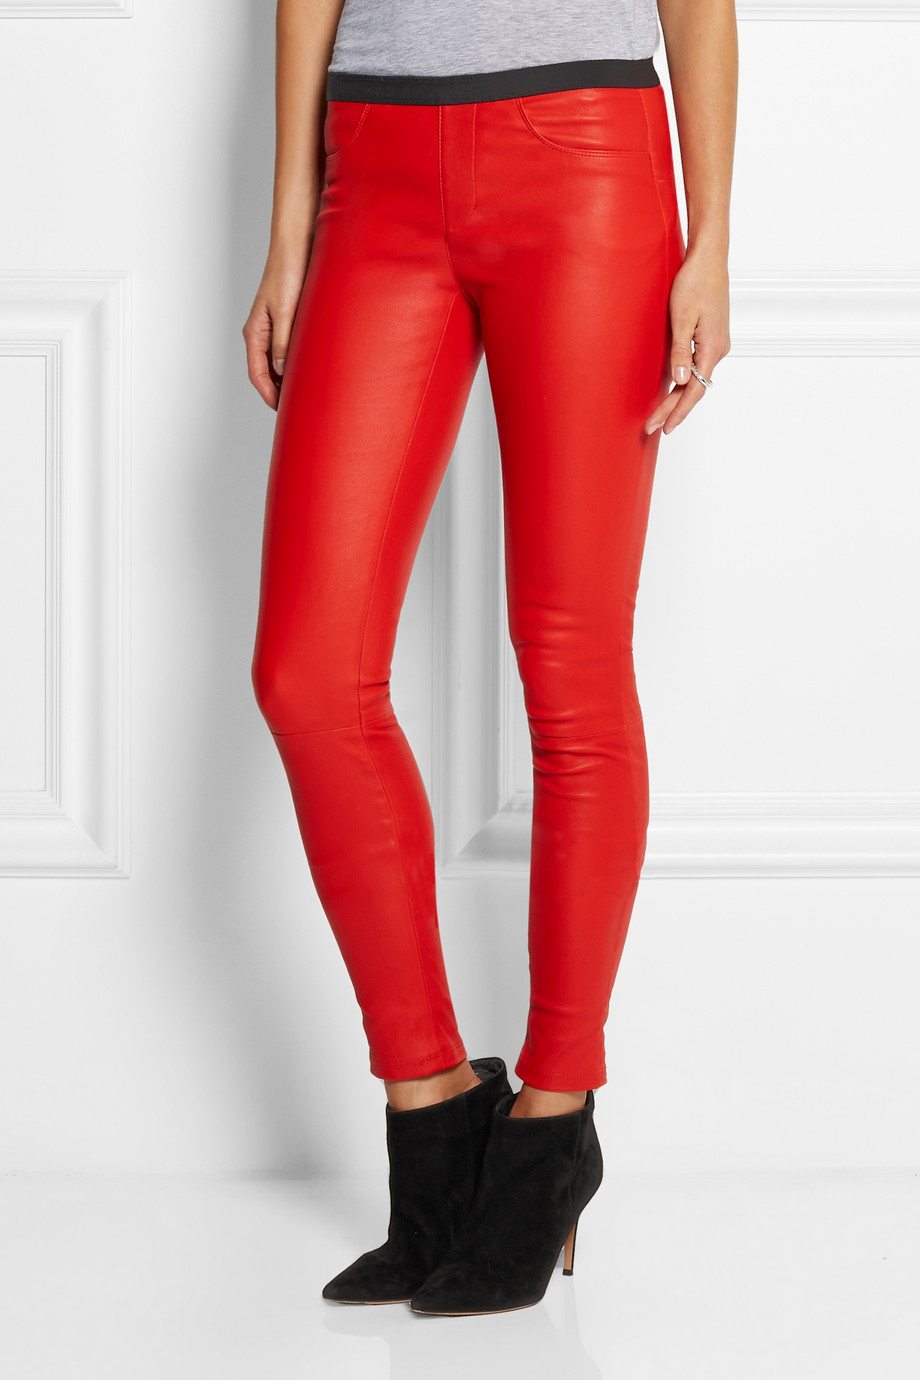 Helmut Lang Leather Leggings Red  International Society of Precision  Agriculture